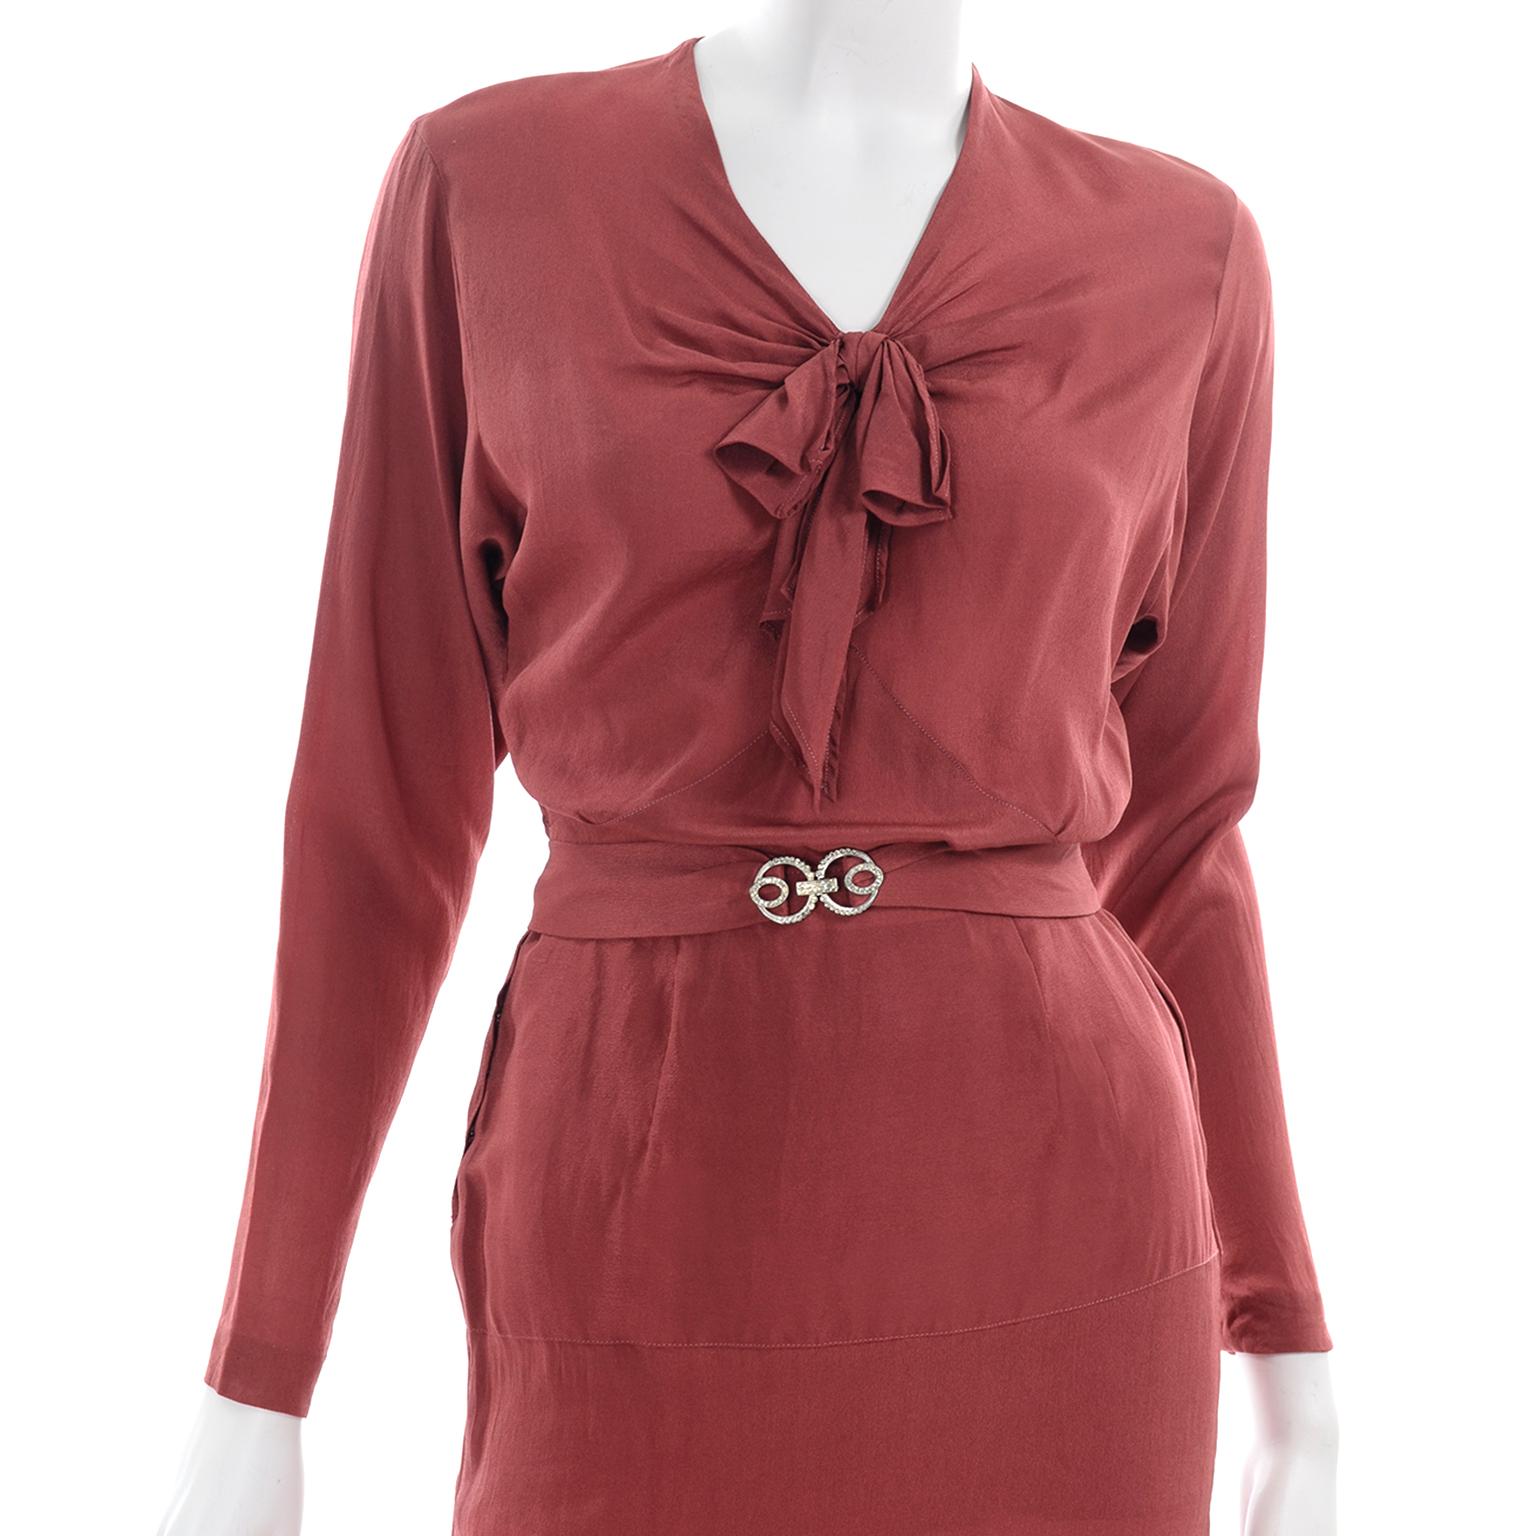 1930s Rusty Red Silk Vintage 2 Pc Bias Dress With Rhinestone Belt and Tie For Sale 4